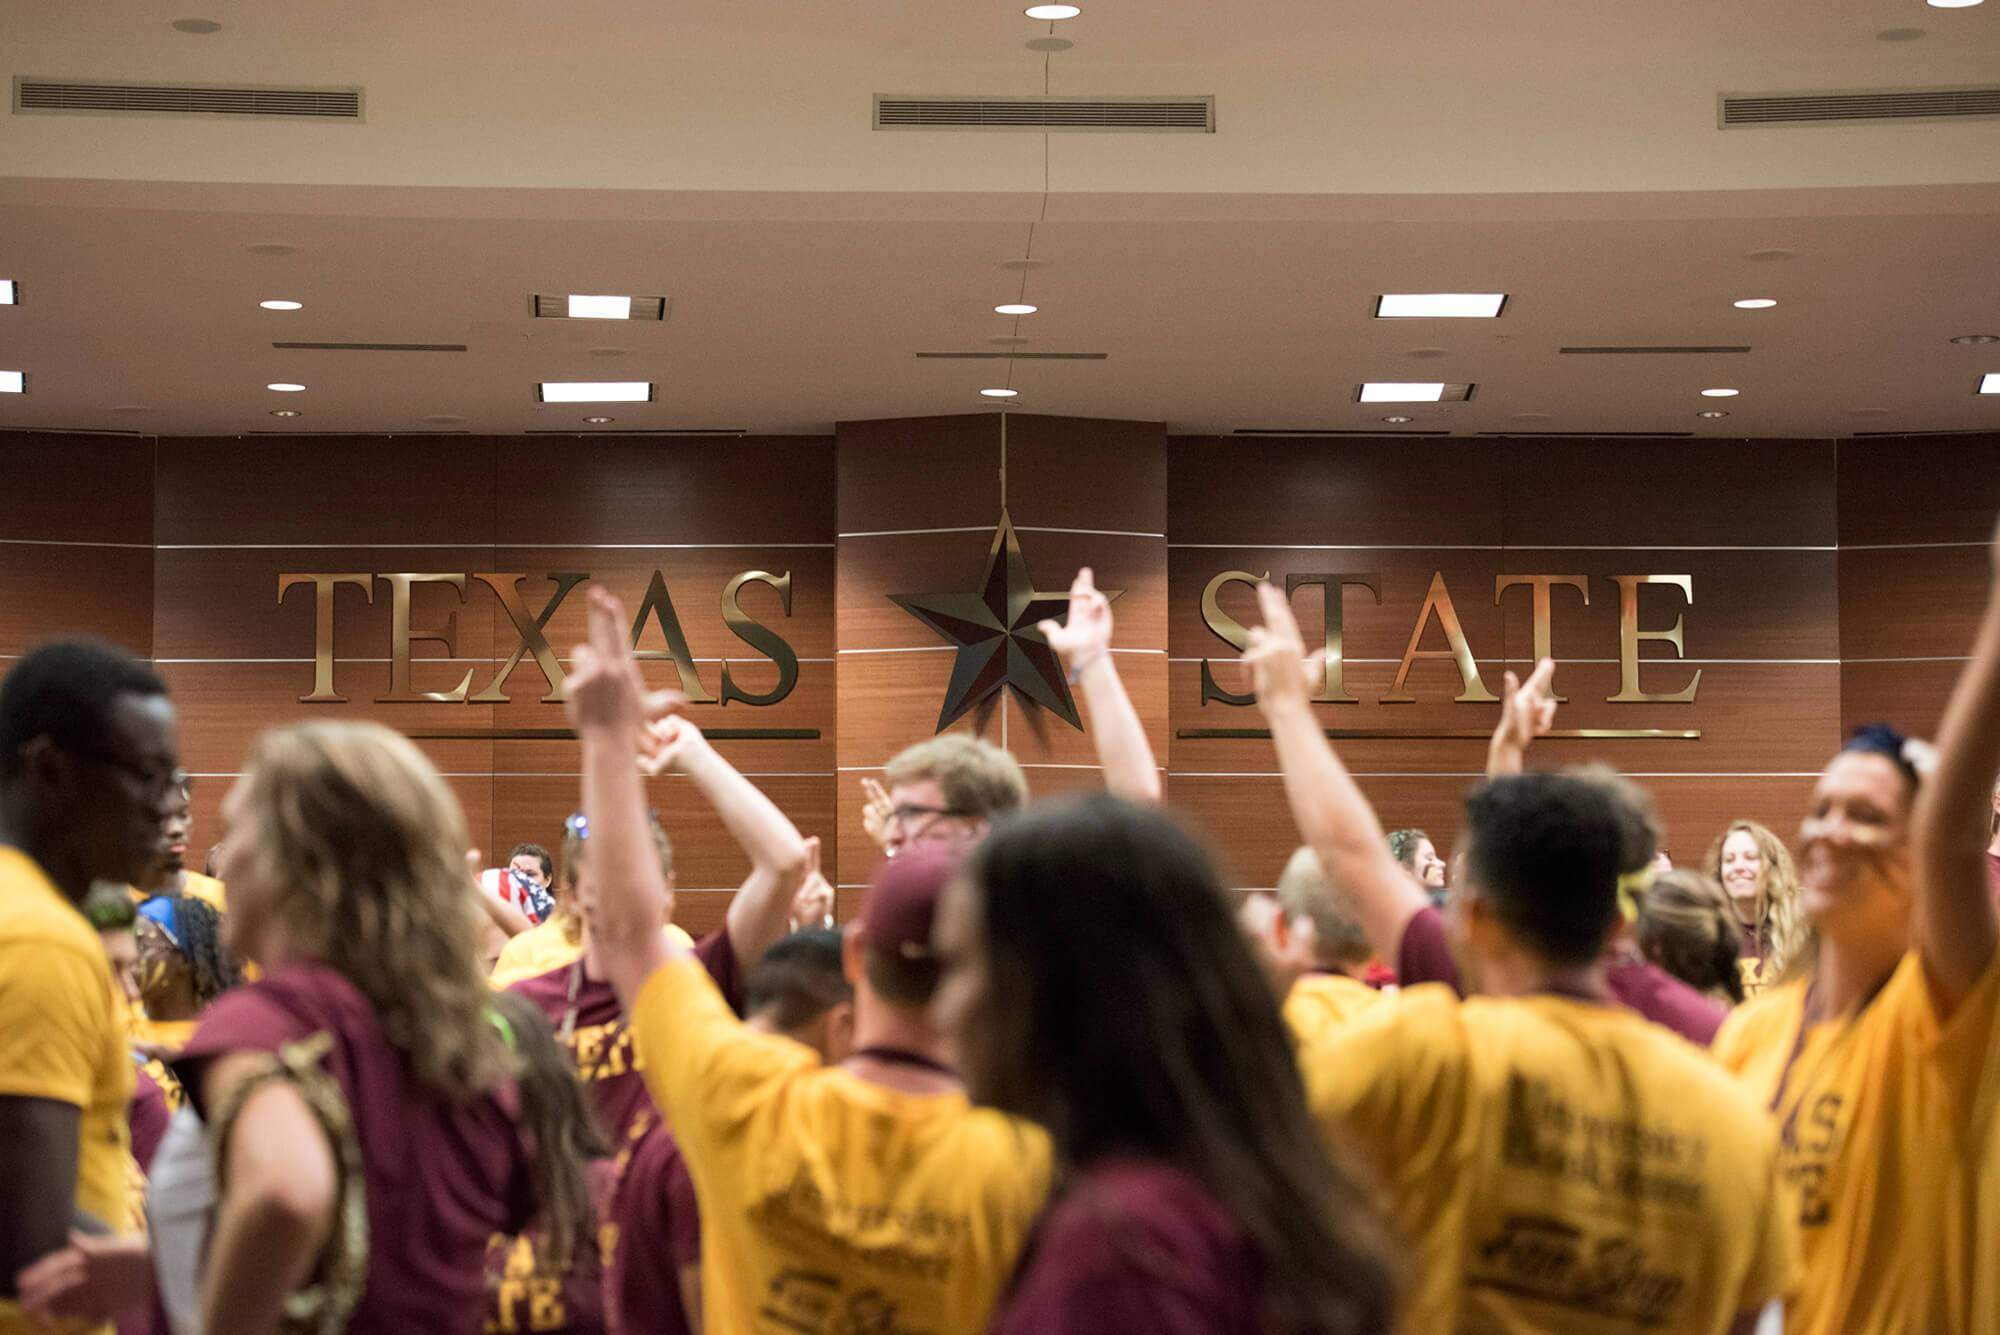 students showing TXST Pride Handsigns